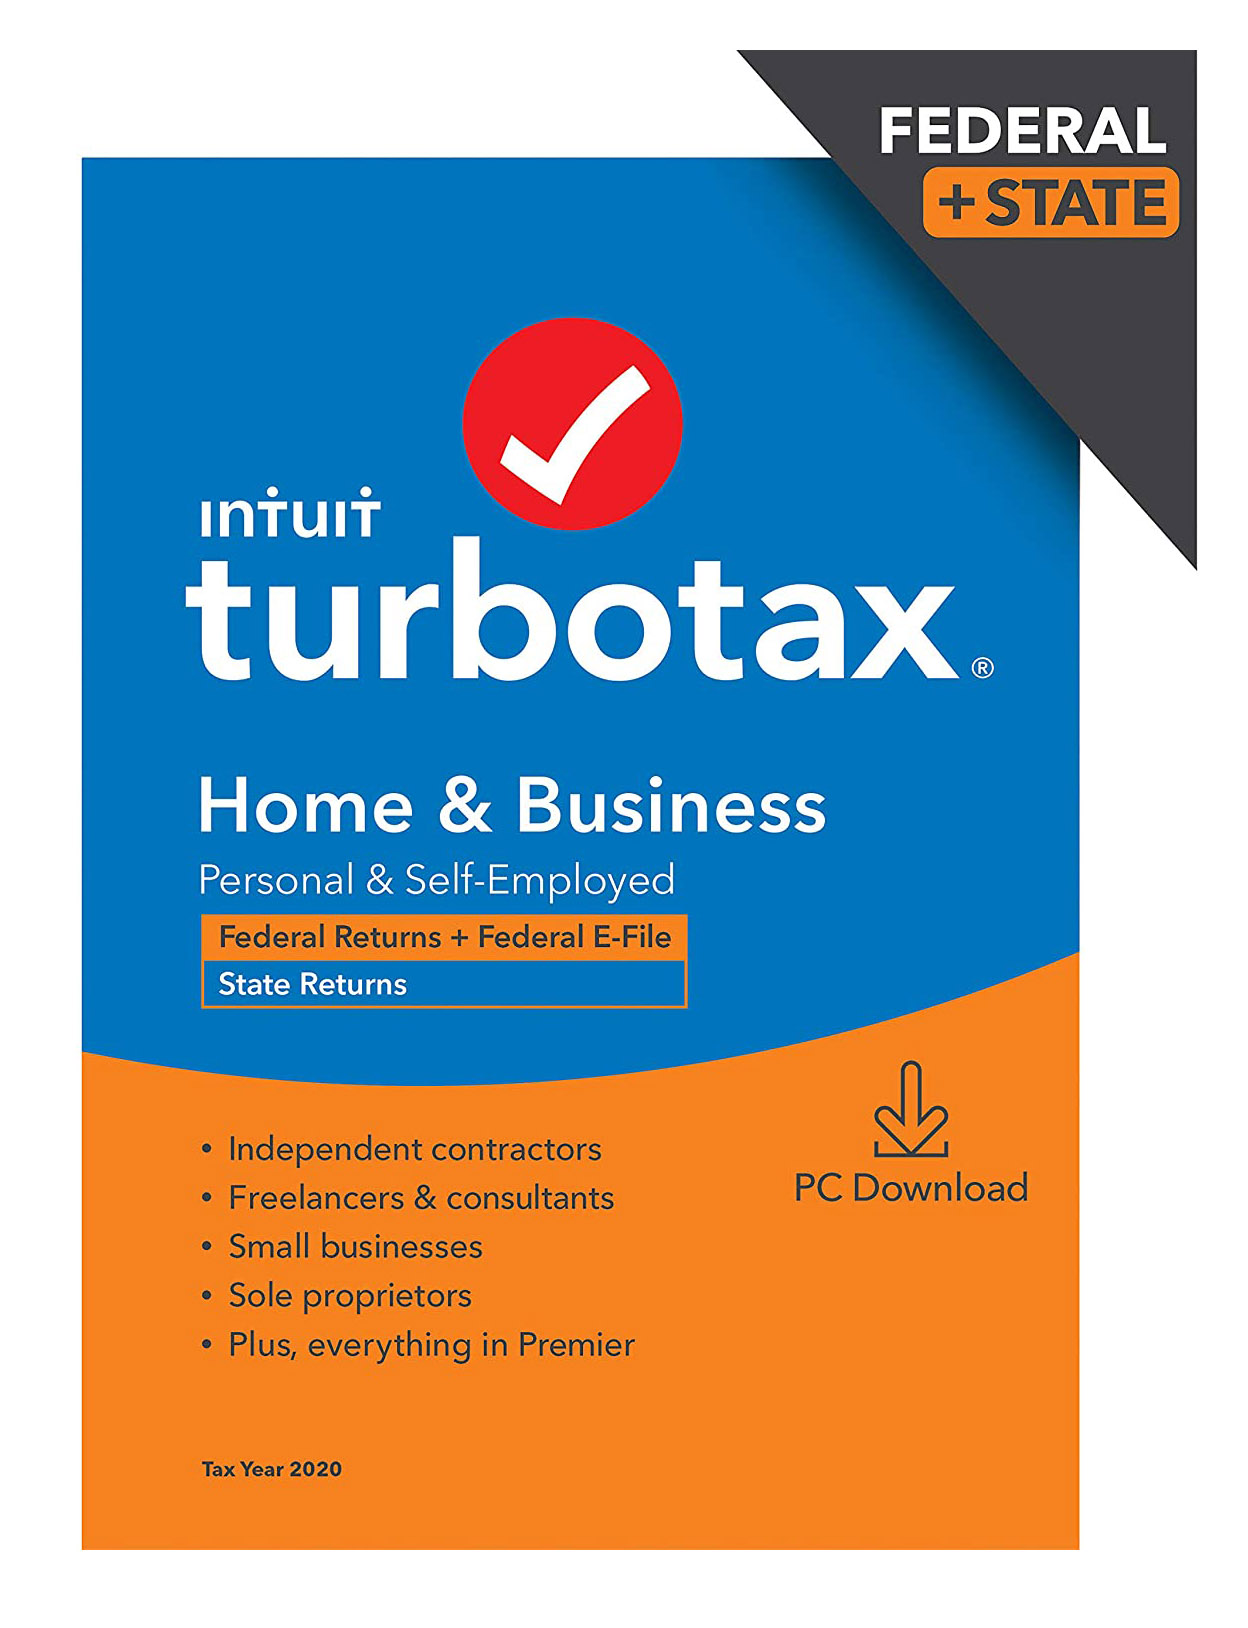 turbo tax for small business owners and photographers